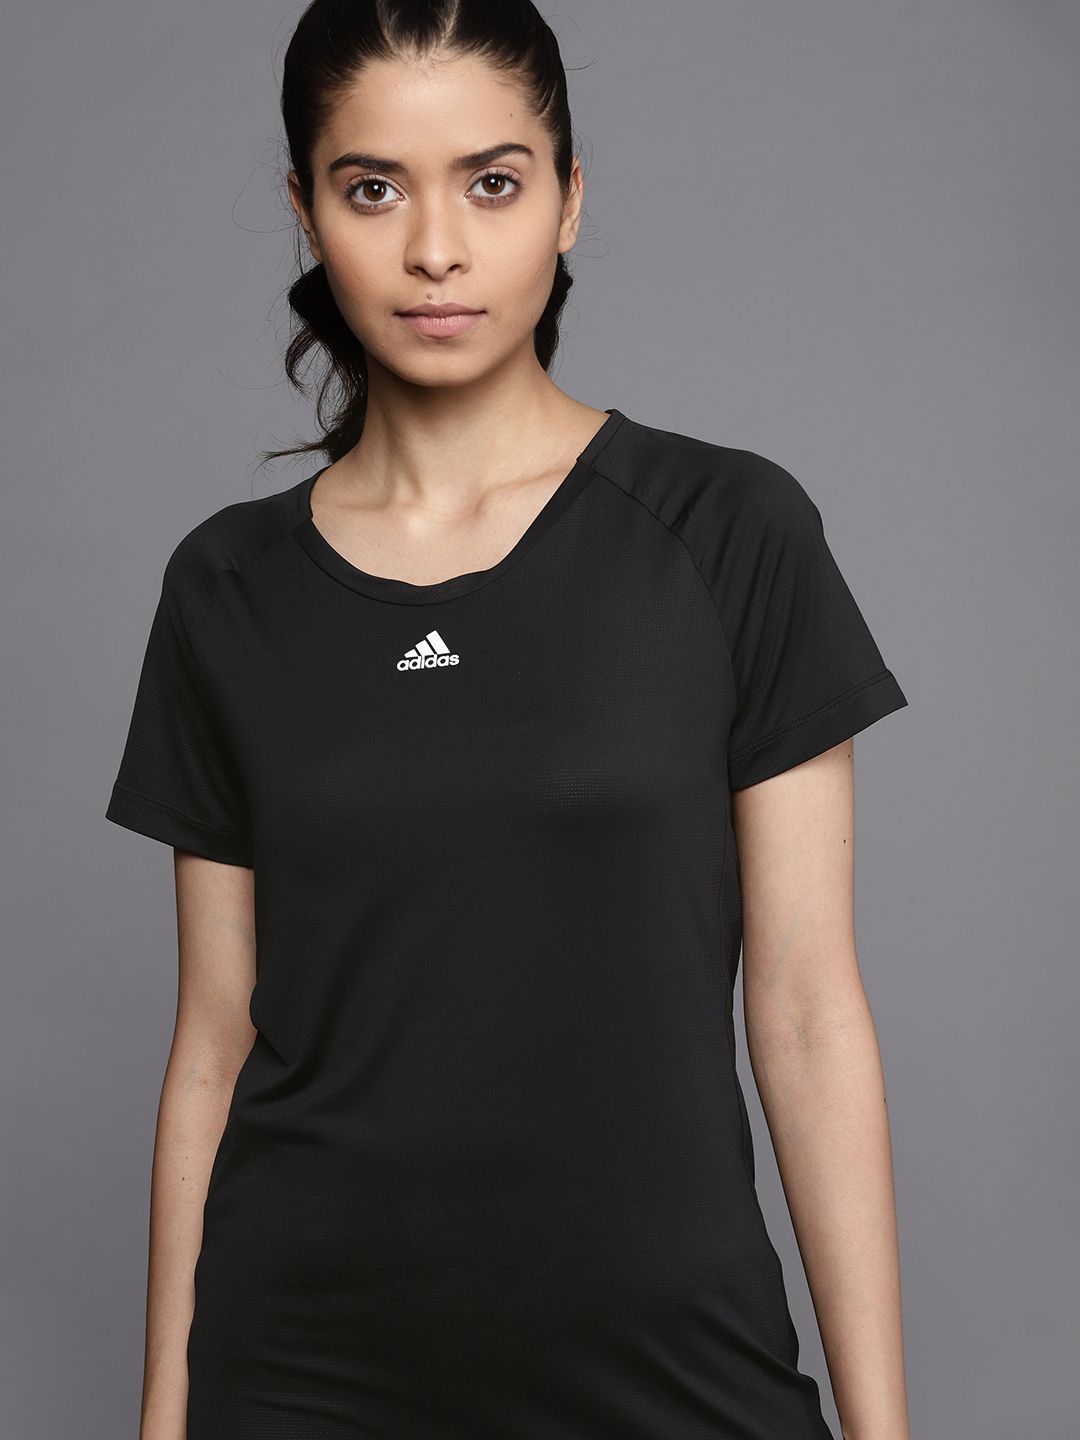 ADIDAS Women Black Solid Slim Fit Training or Gym Sustainable T-shirt Price in India